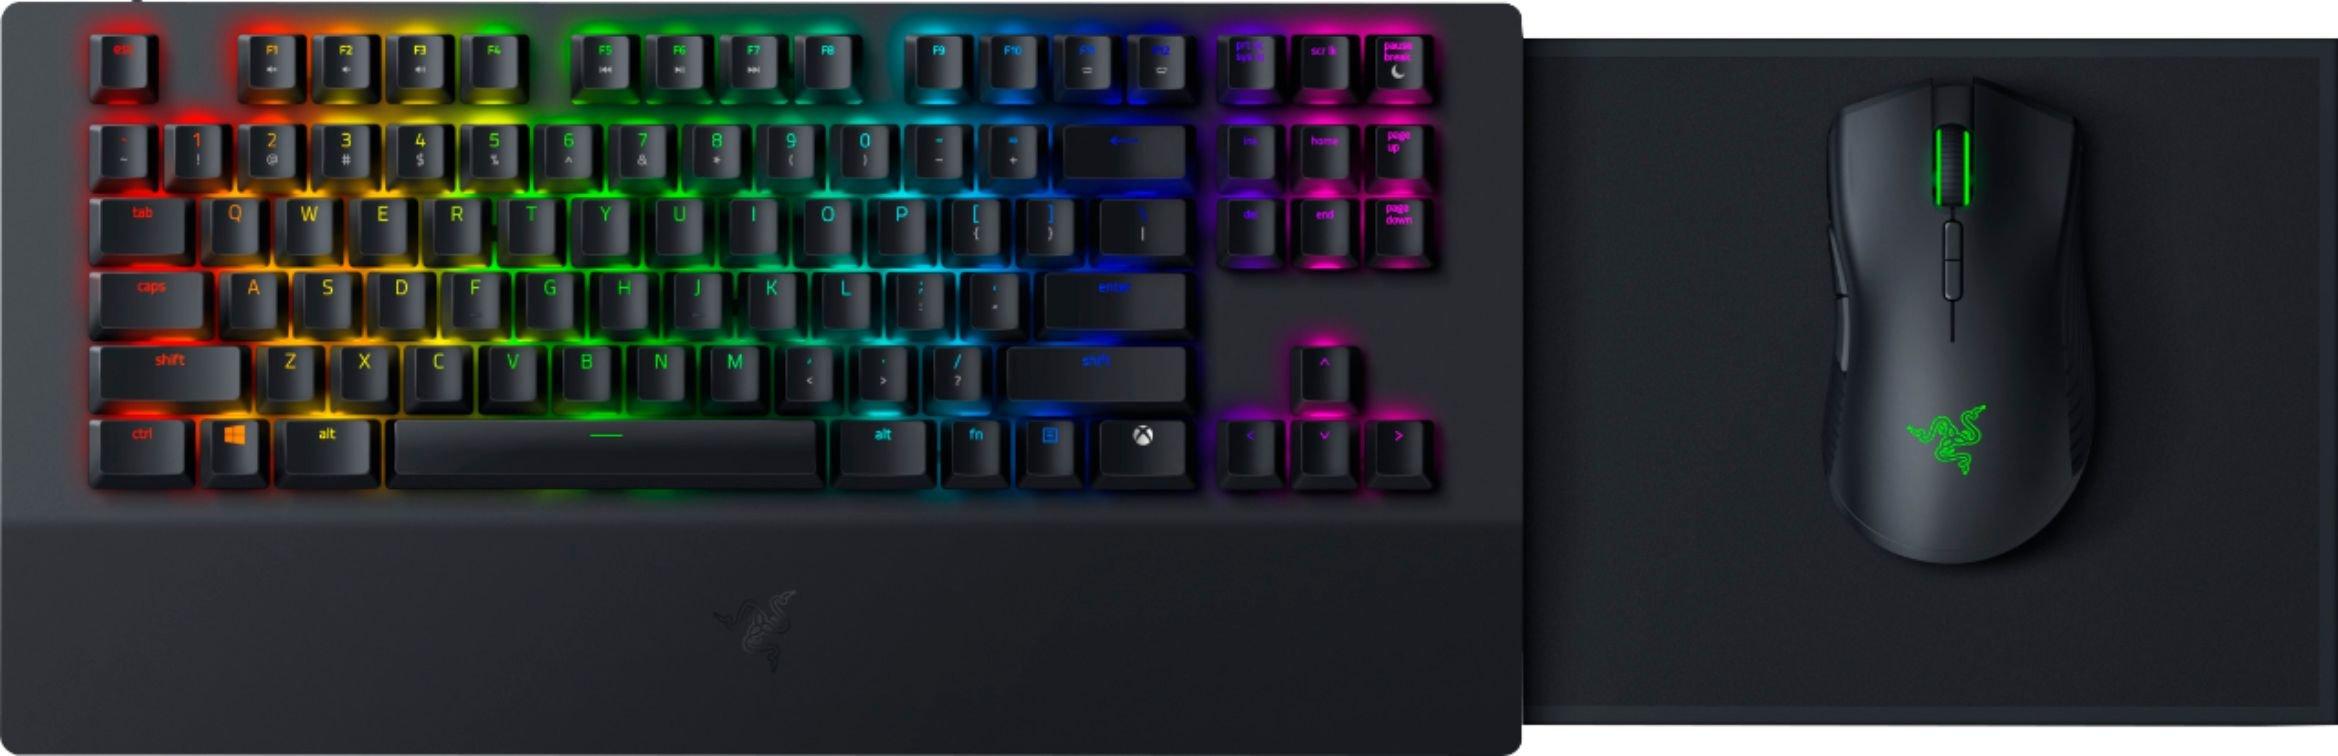 Razer Turret Keyboard for Xbox One Gets Surprise CES 2019 Launch